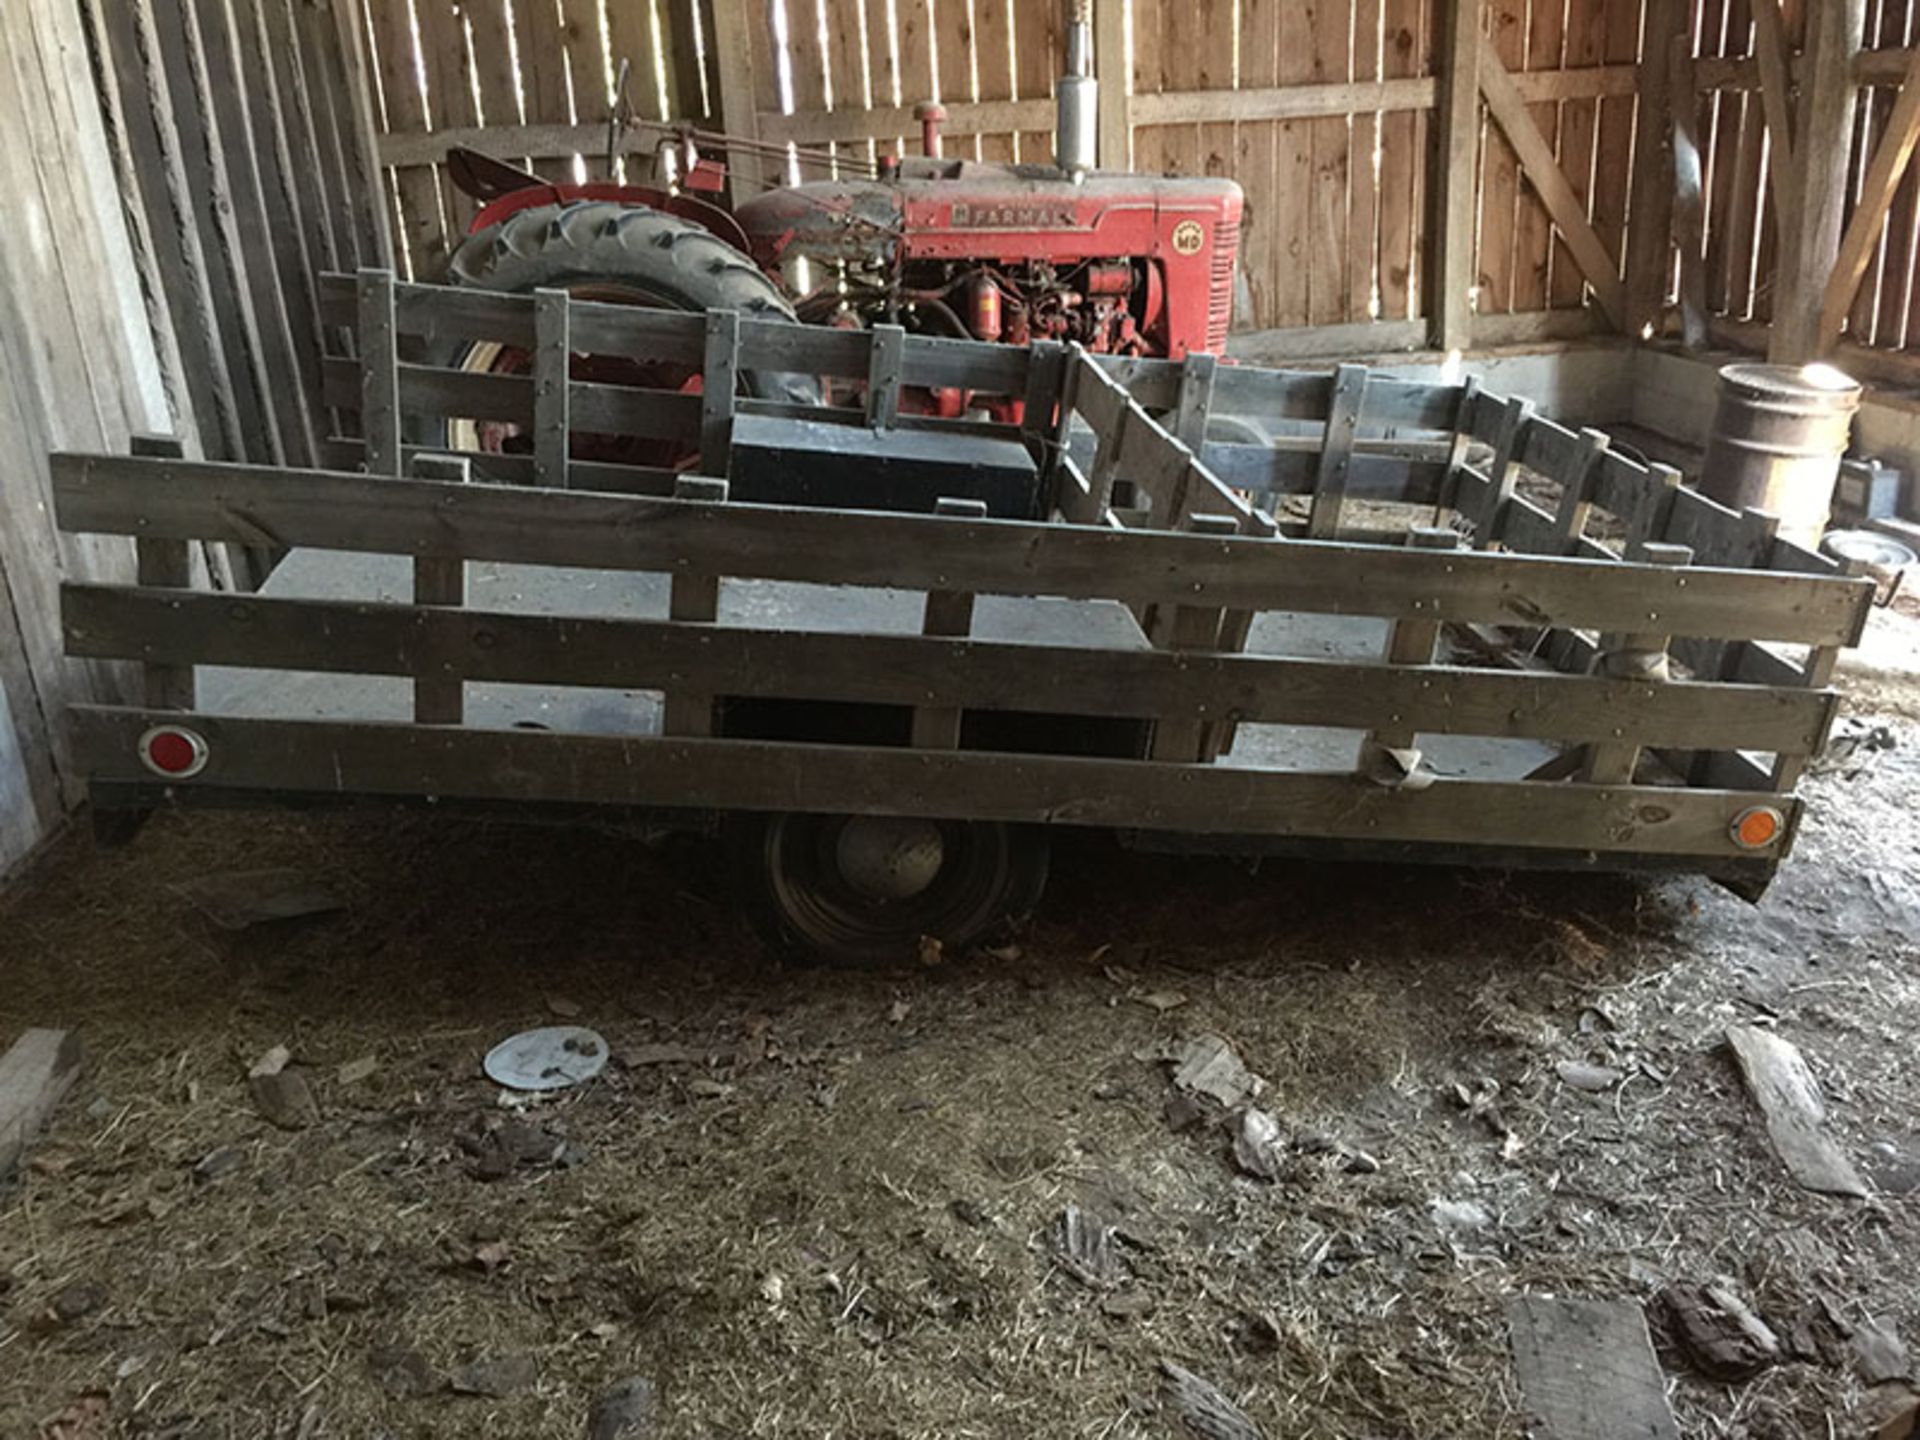 ONE STEEL FRAME TRAILER WITH WOOD RAILINGS & BUILT IN BOX, LOCATION MI, BUYER TO SHIP